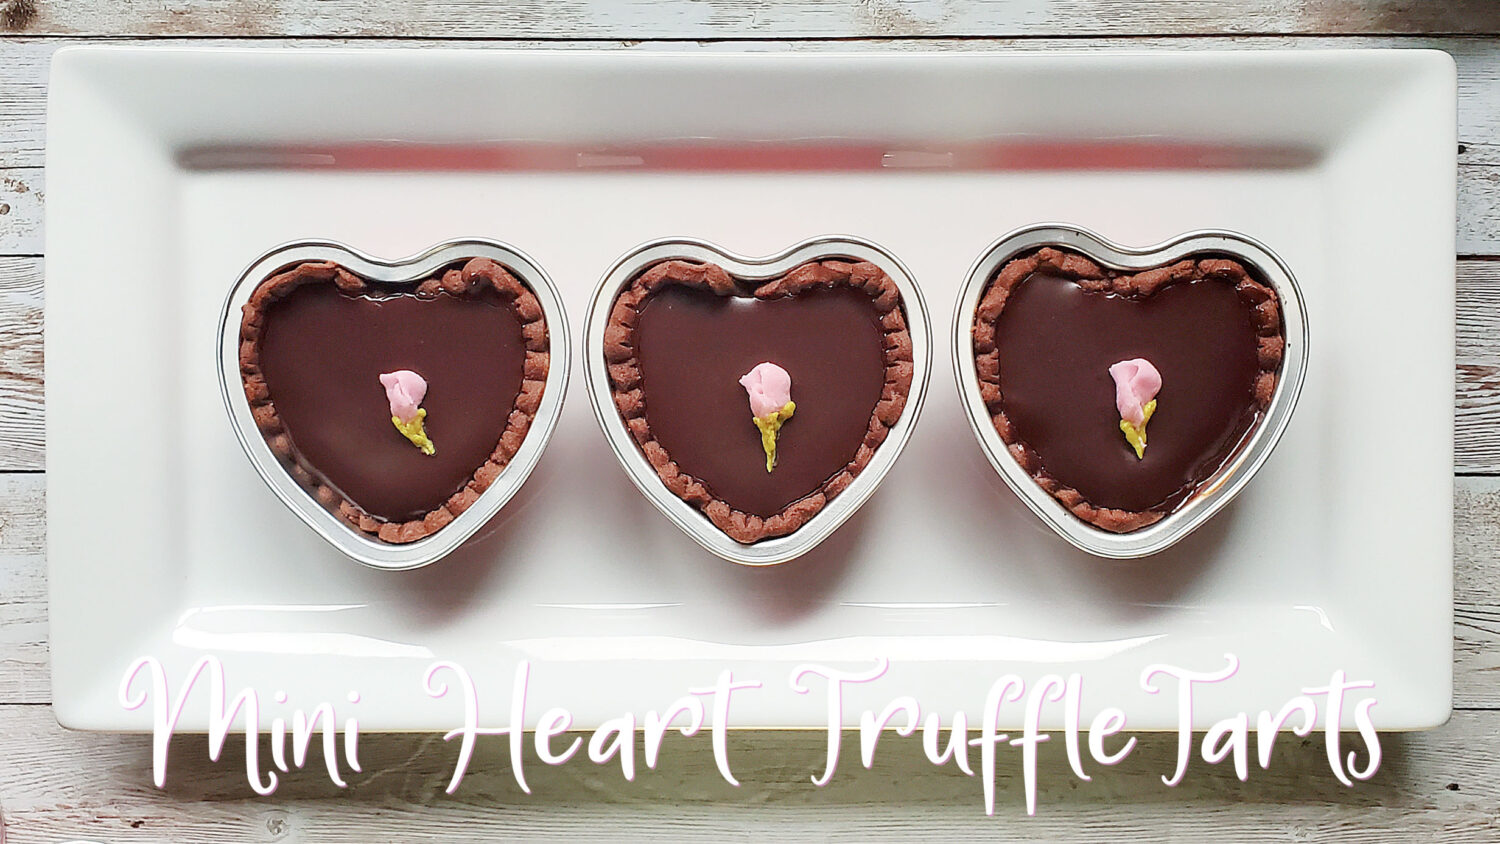 Decadent chocolate truffle filling in a dark chocolate crust, & a ganache glaze, baked into mini hearts. Perfect for Valentines Day!